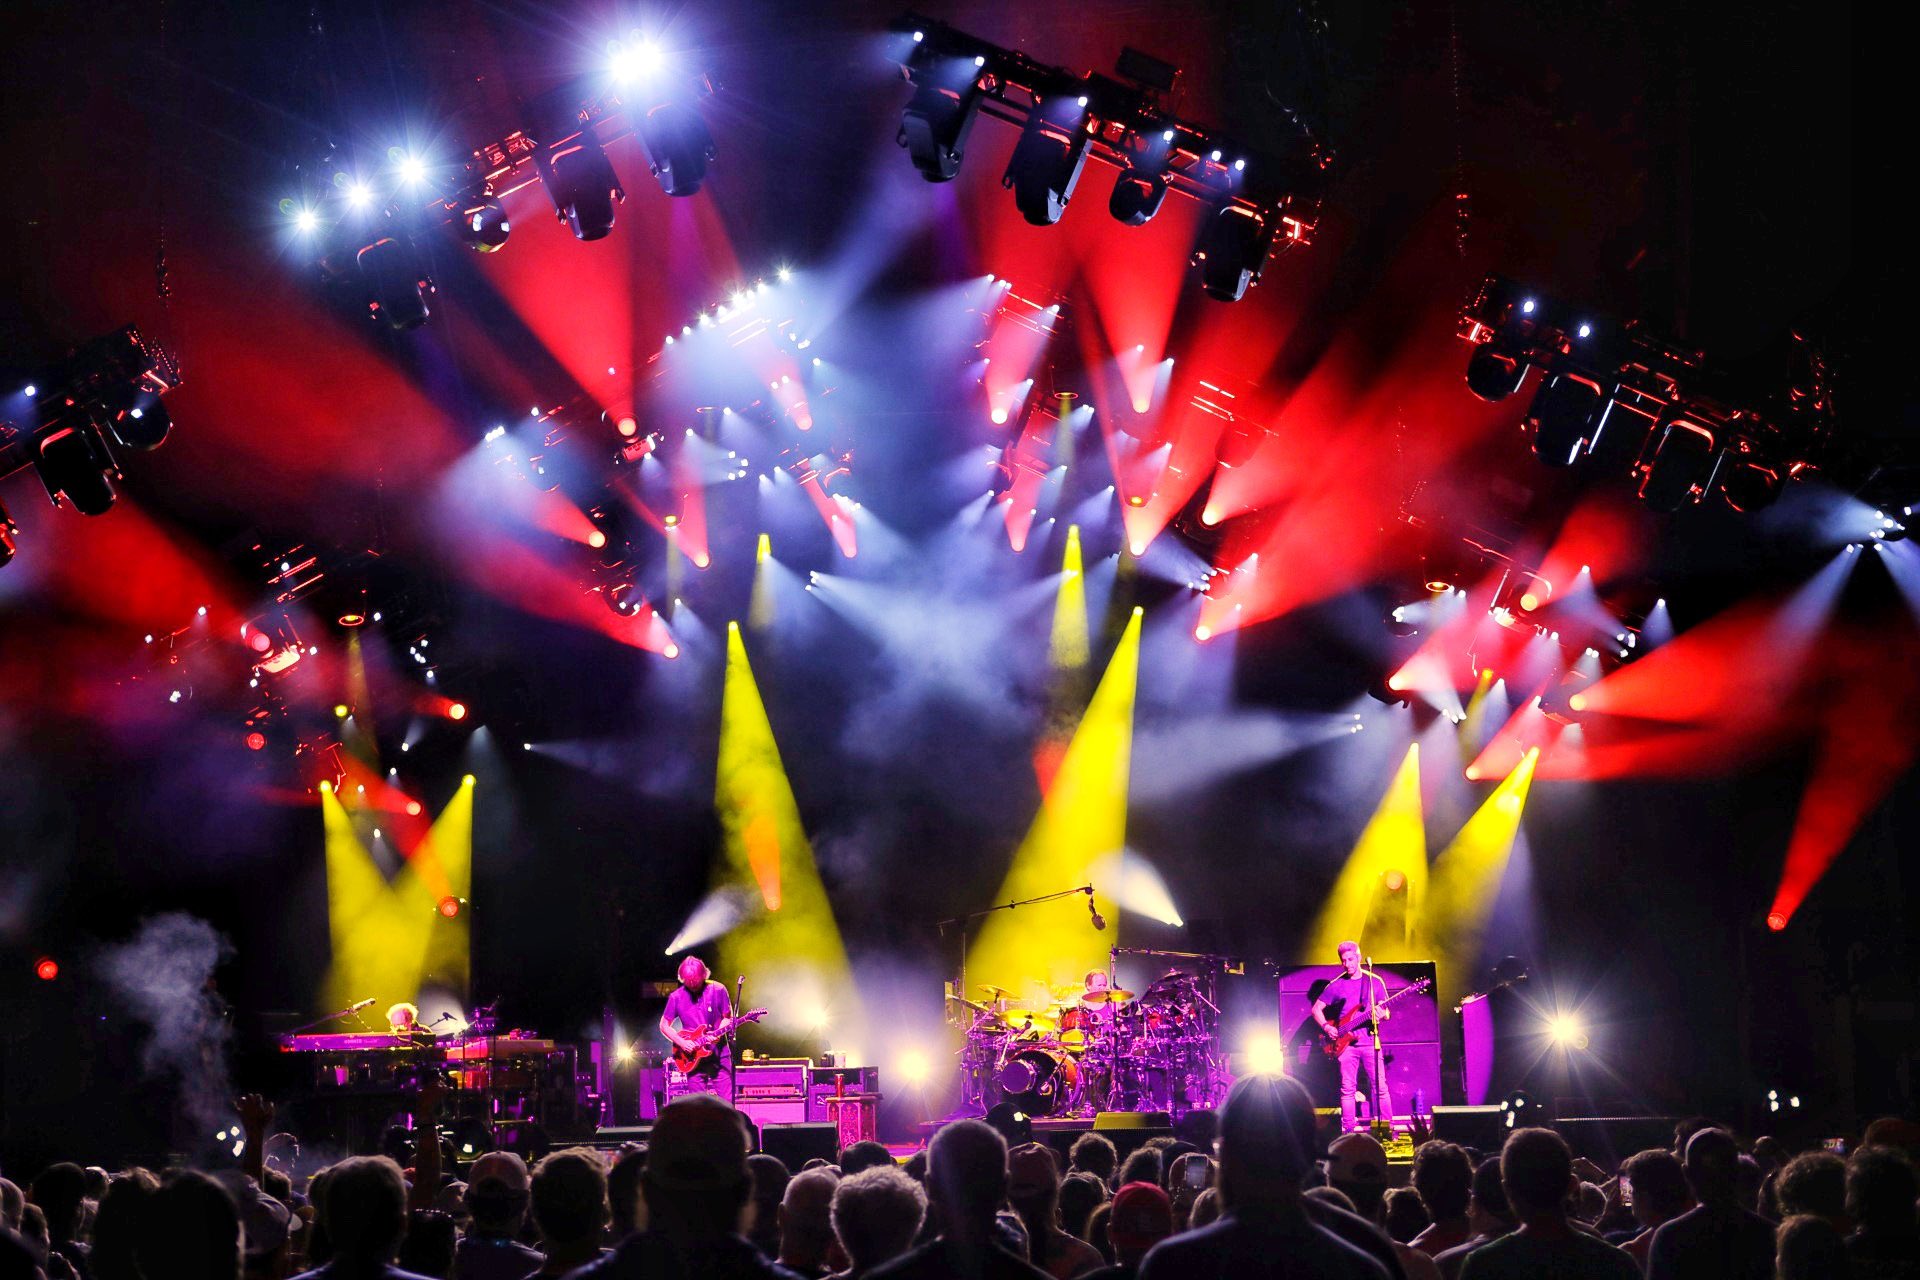 © 2021 Phish - Rene Huemer (used with permission)